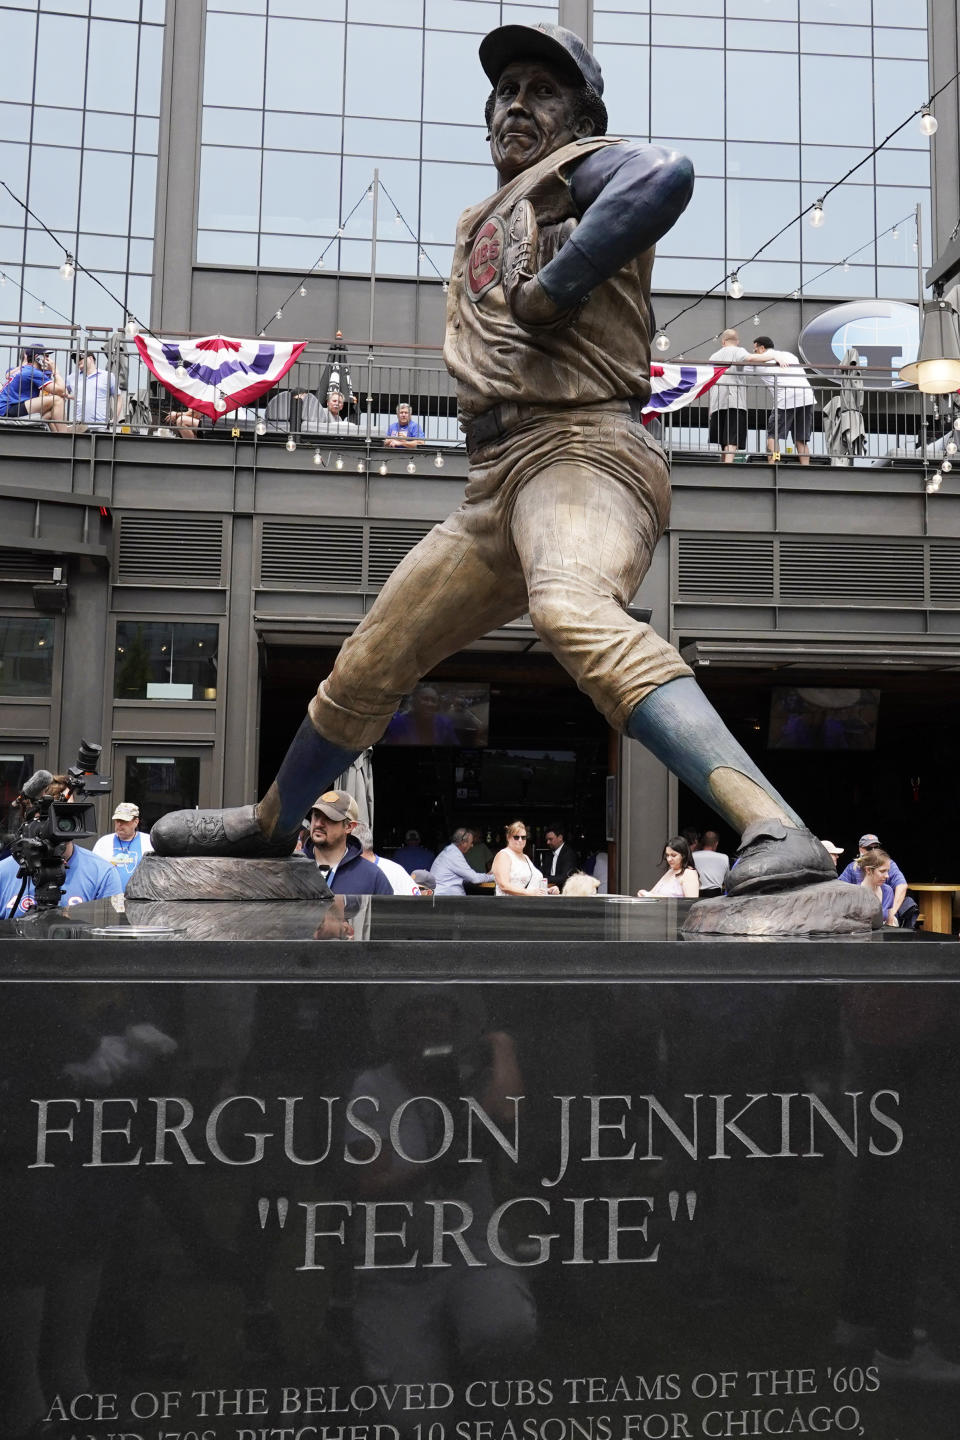 The Chicago Cubs unveiled a statue honoring the former Cubs pitcher, Baseball Hall of Famer Ferguson Jenkins in Chicago, Friday, May 20, 2022, in Chicago. (AP Photo/Nam Y. Huh)